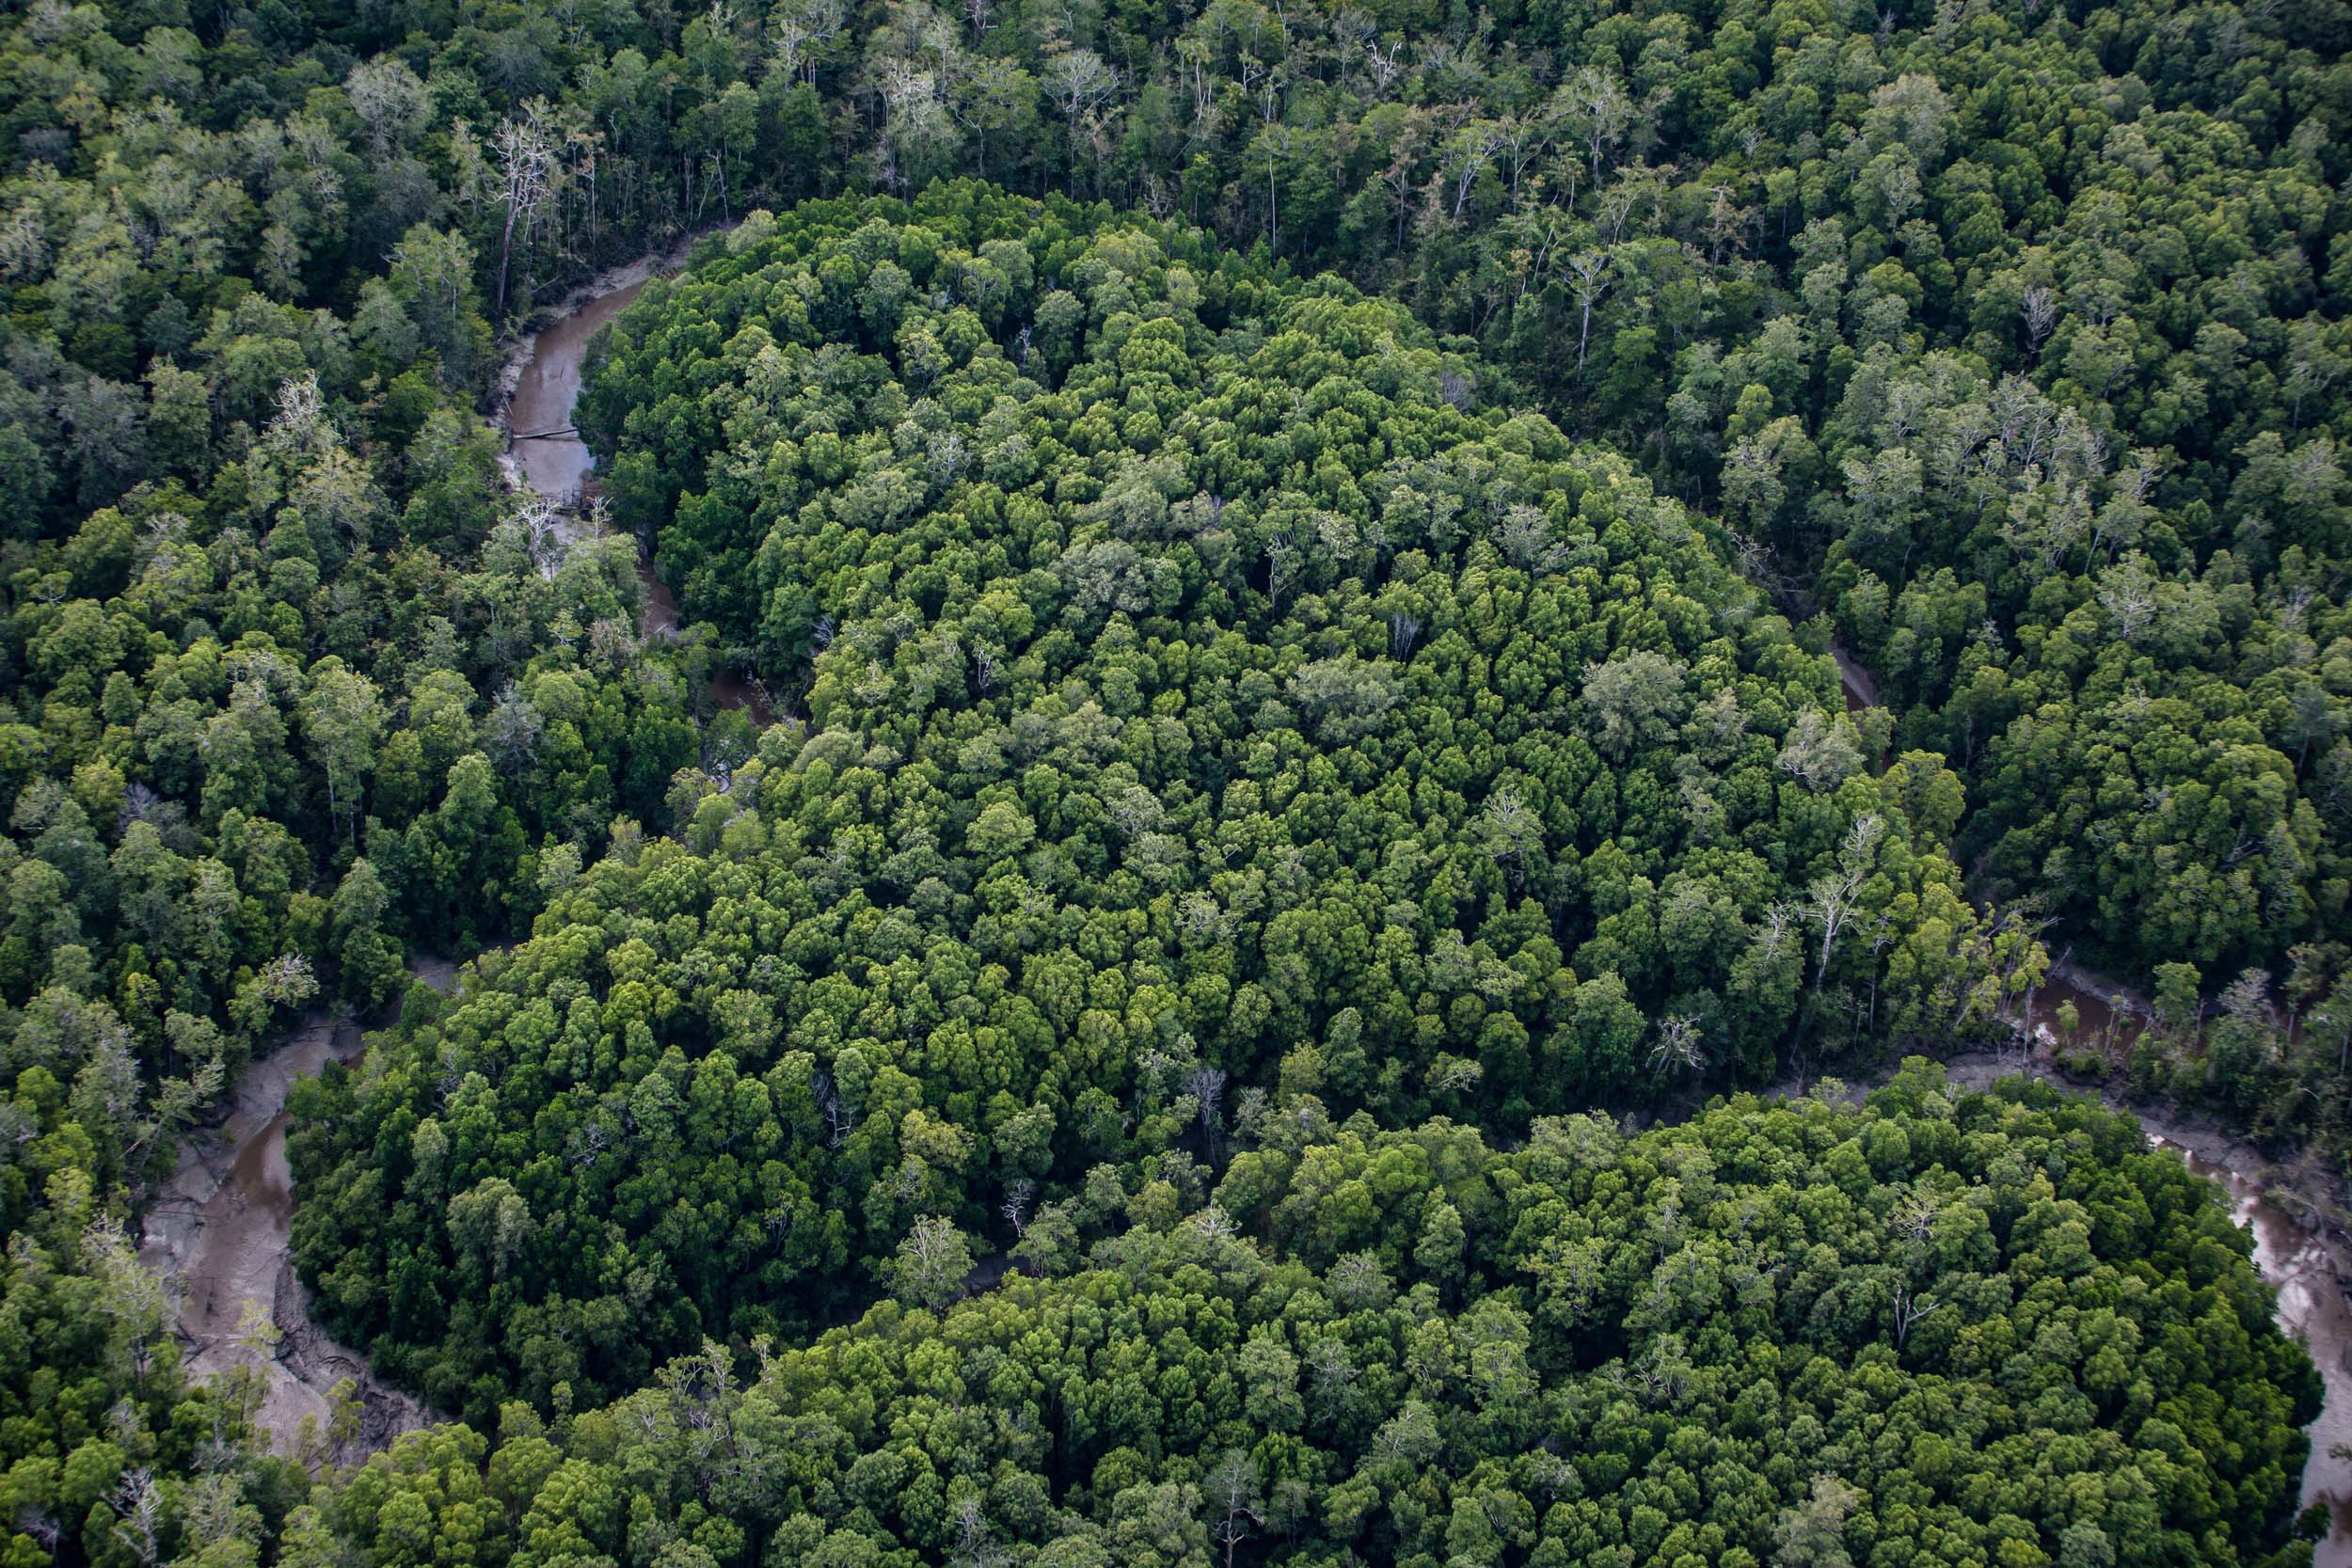 Aerial view of a patch of dense forest, with the clear outline of a heart shape made by a winding river.